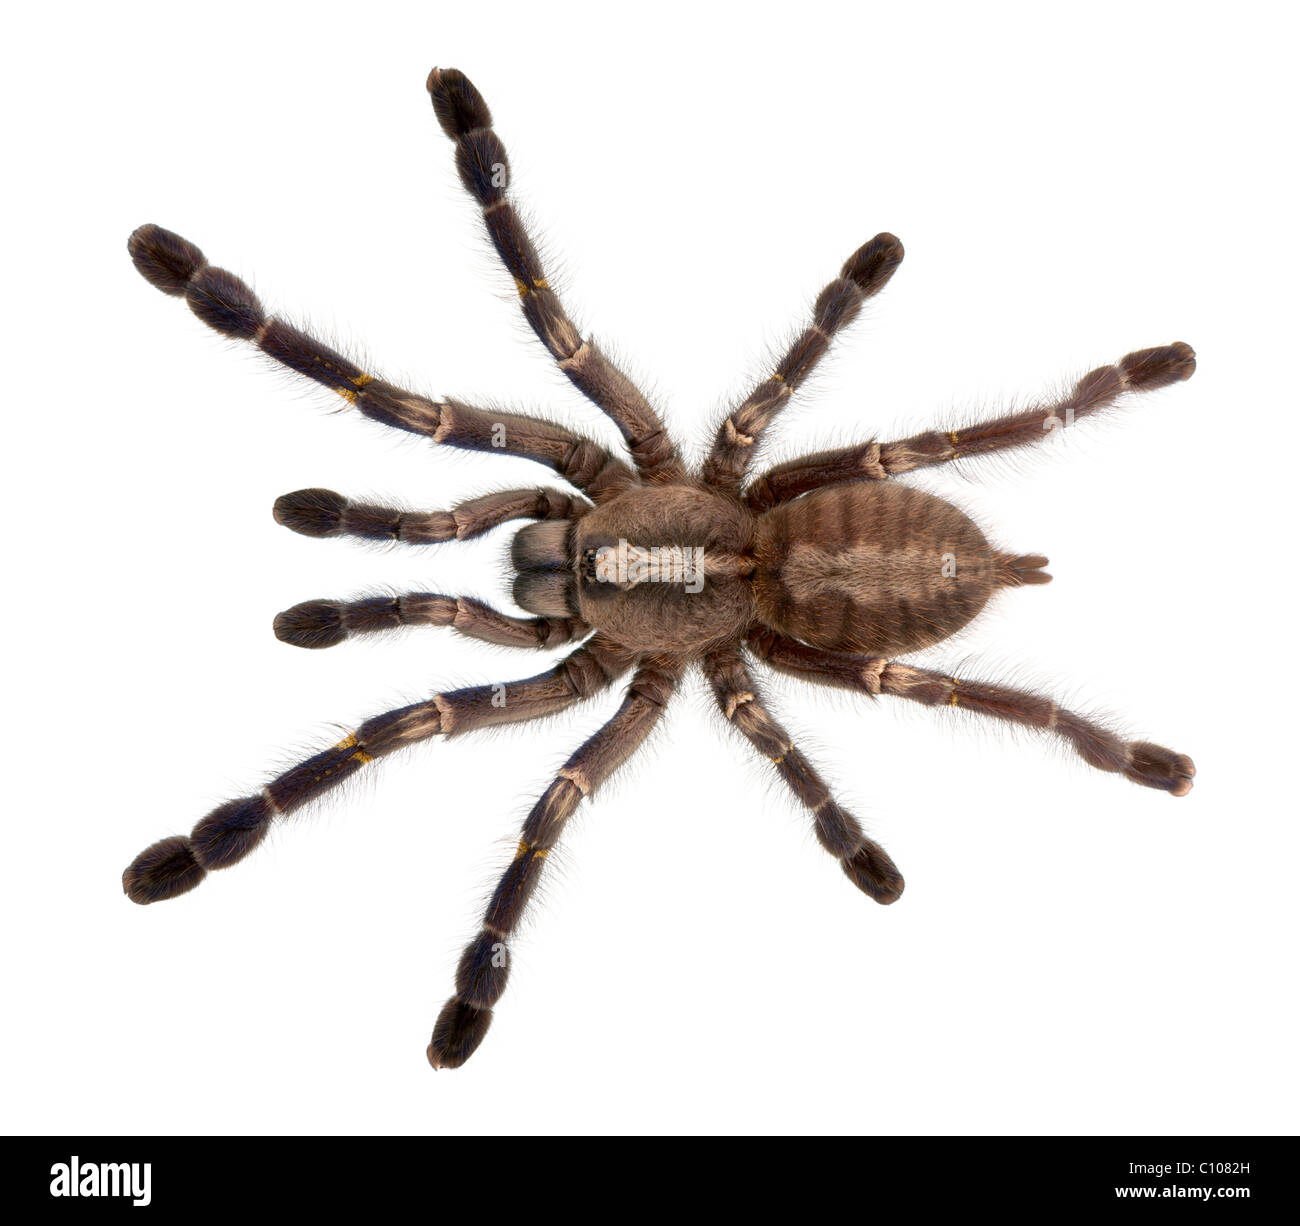 Tarantula spider, Poecilotheria Metallica, in front of white background Banque D'Images